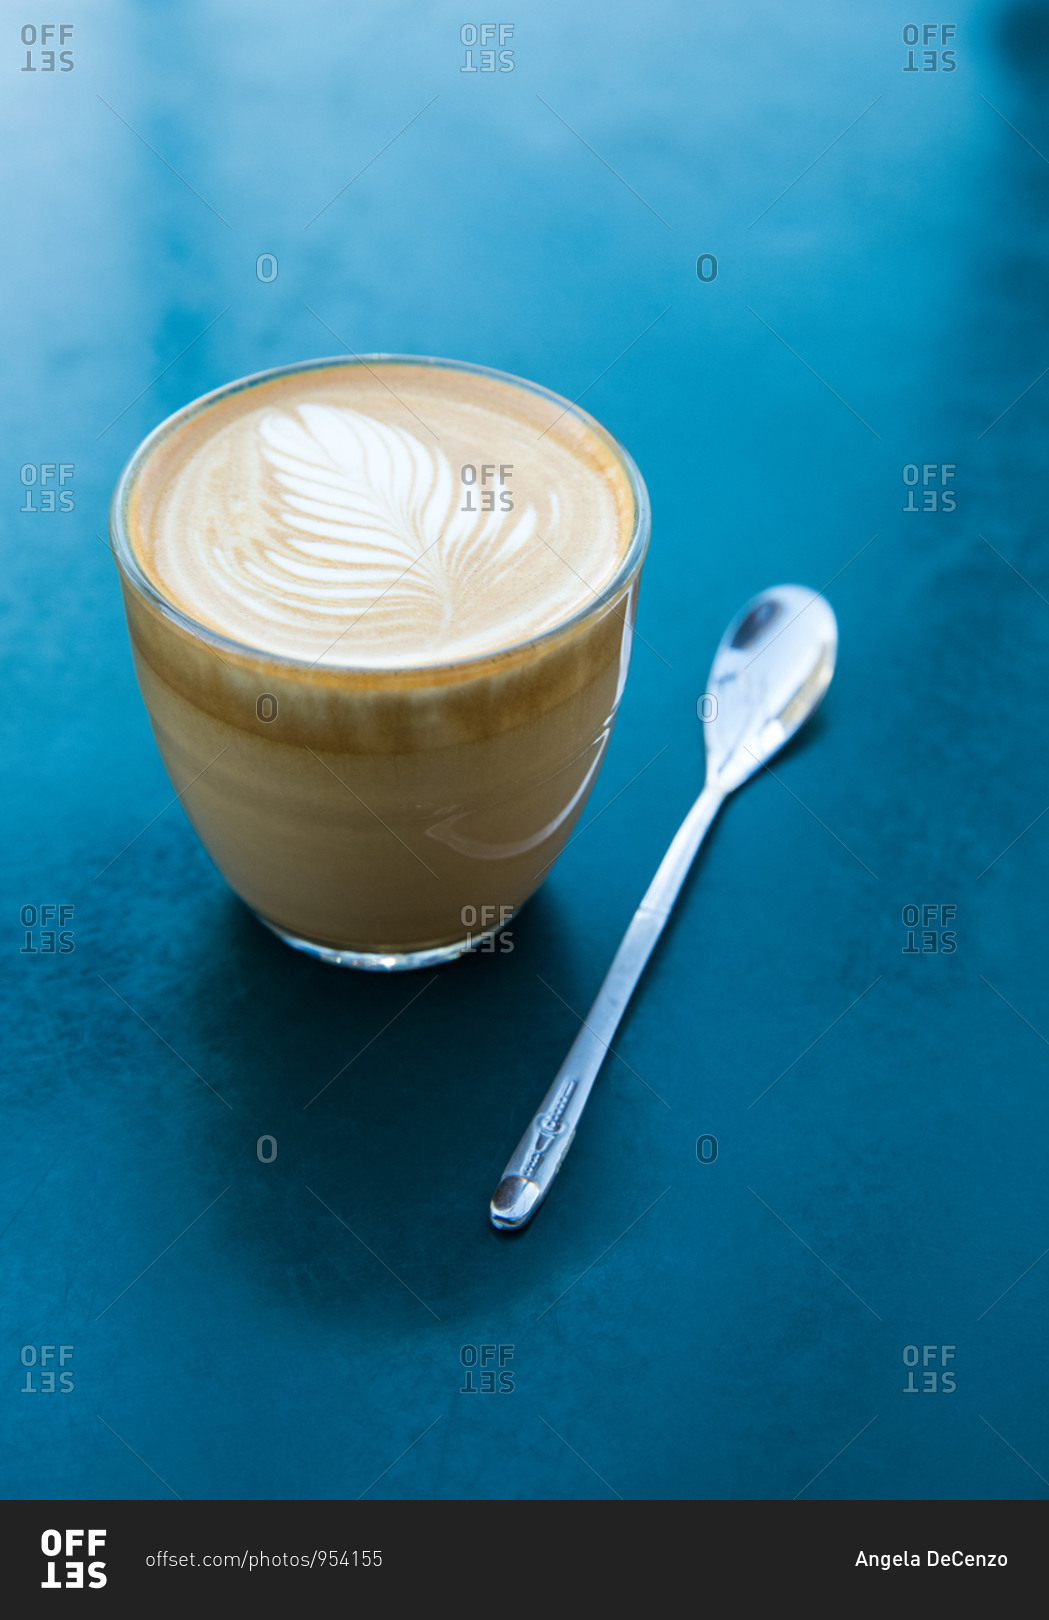 A cortado and small spoon sitting on a cerulean blue surface